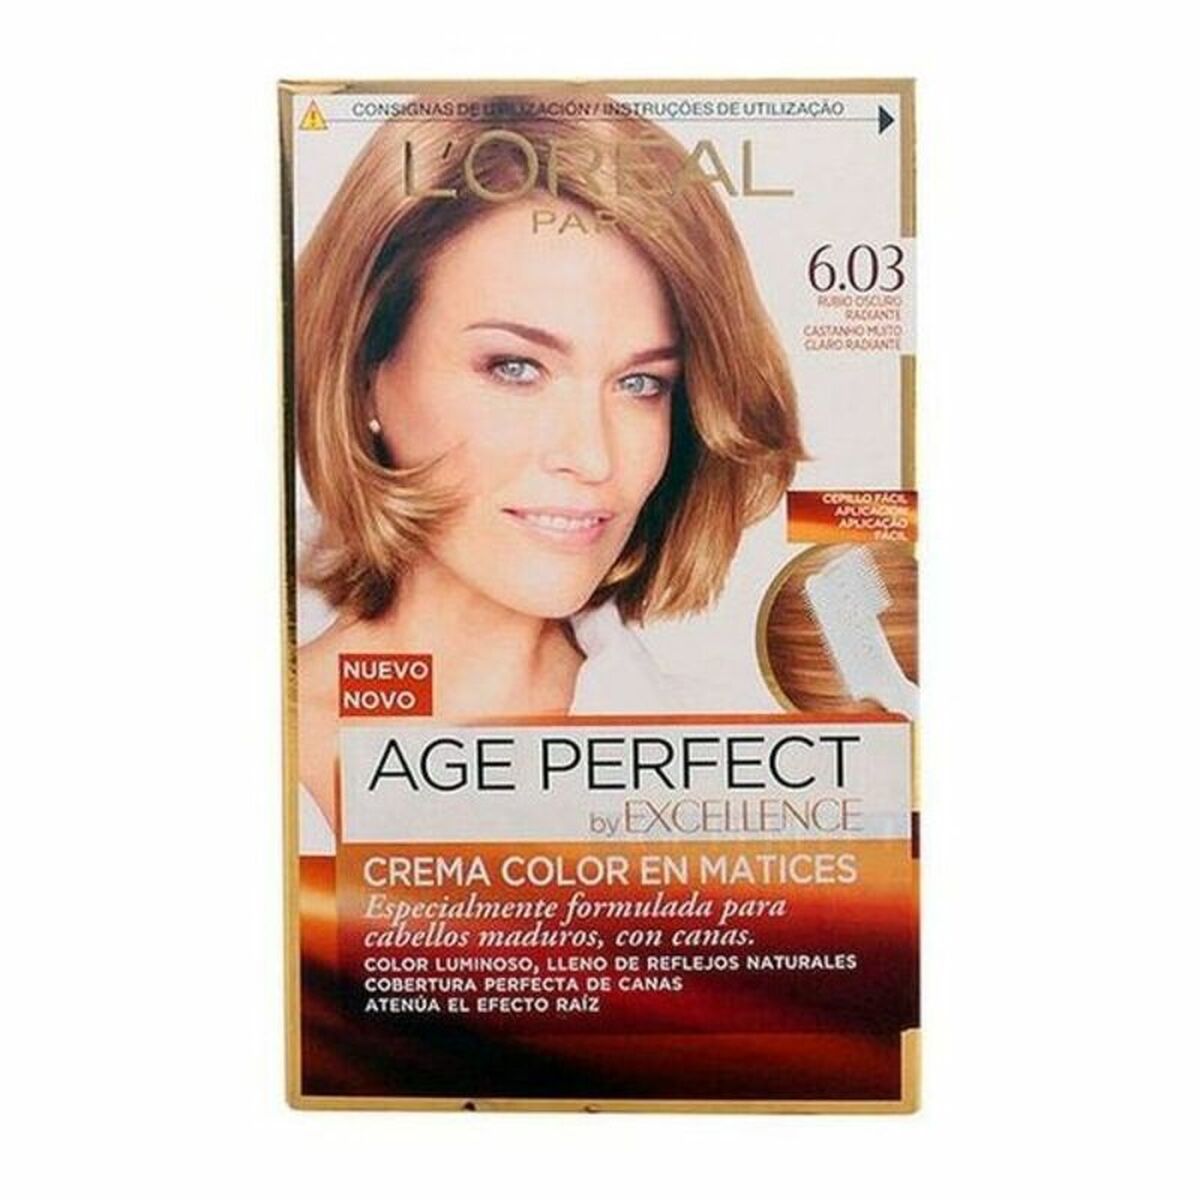 Permanent Anti-Ageing Dye Excellence Age Perfect L'Oreal Make Up Dark blonde